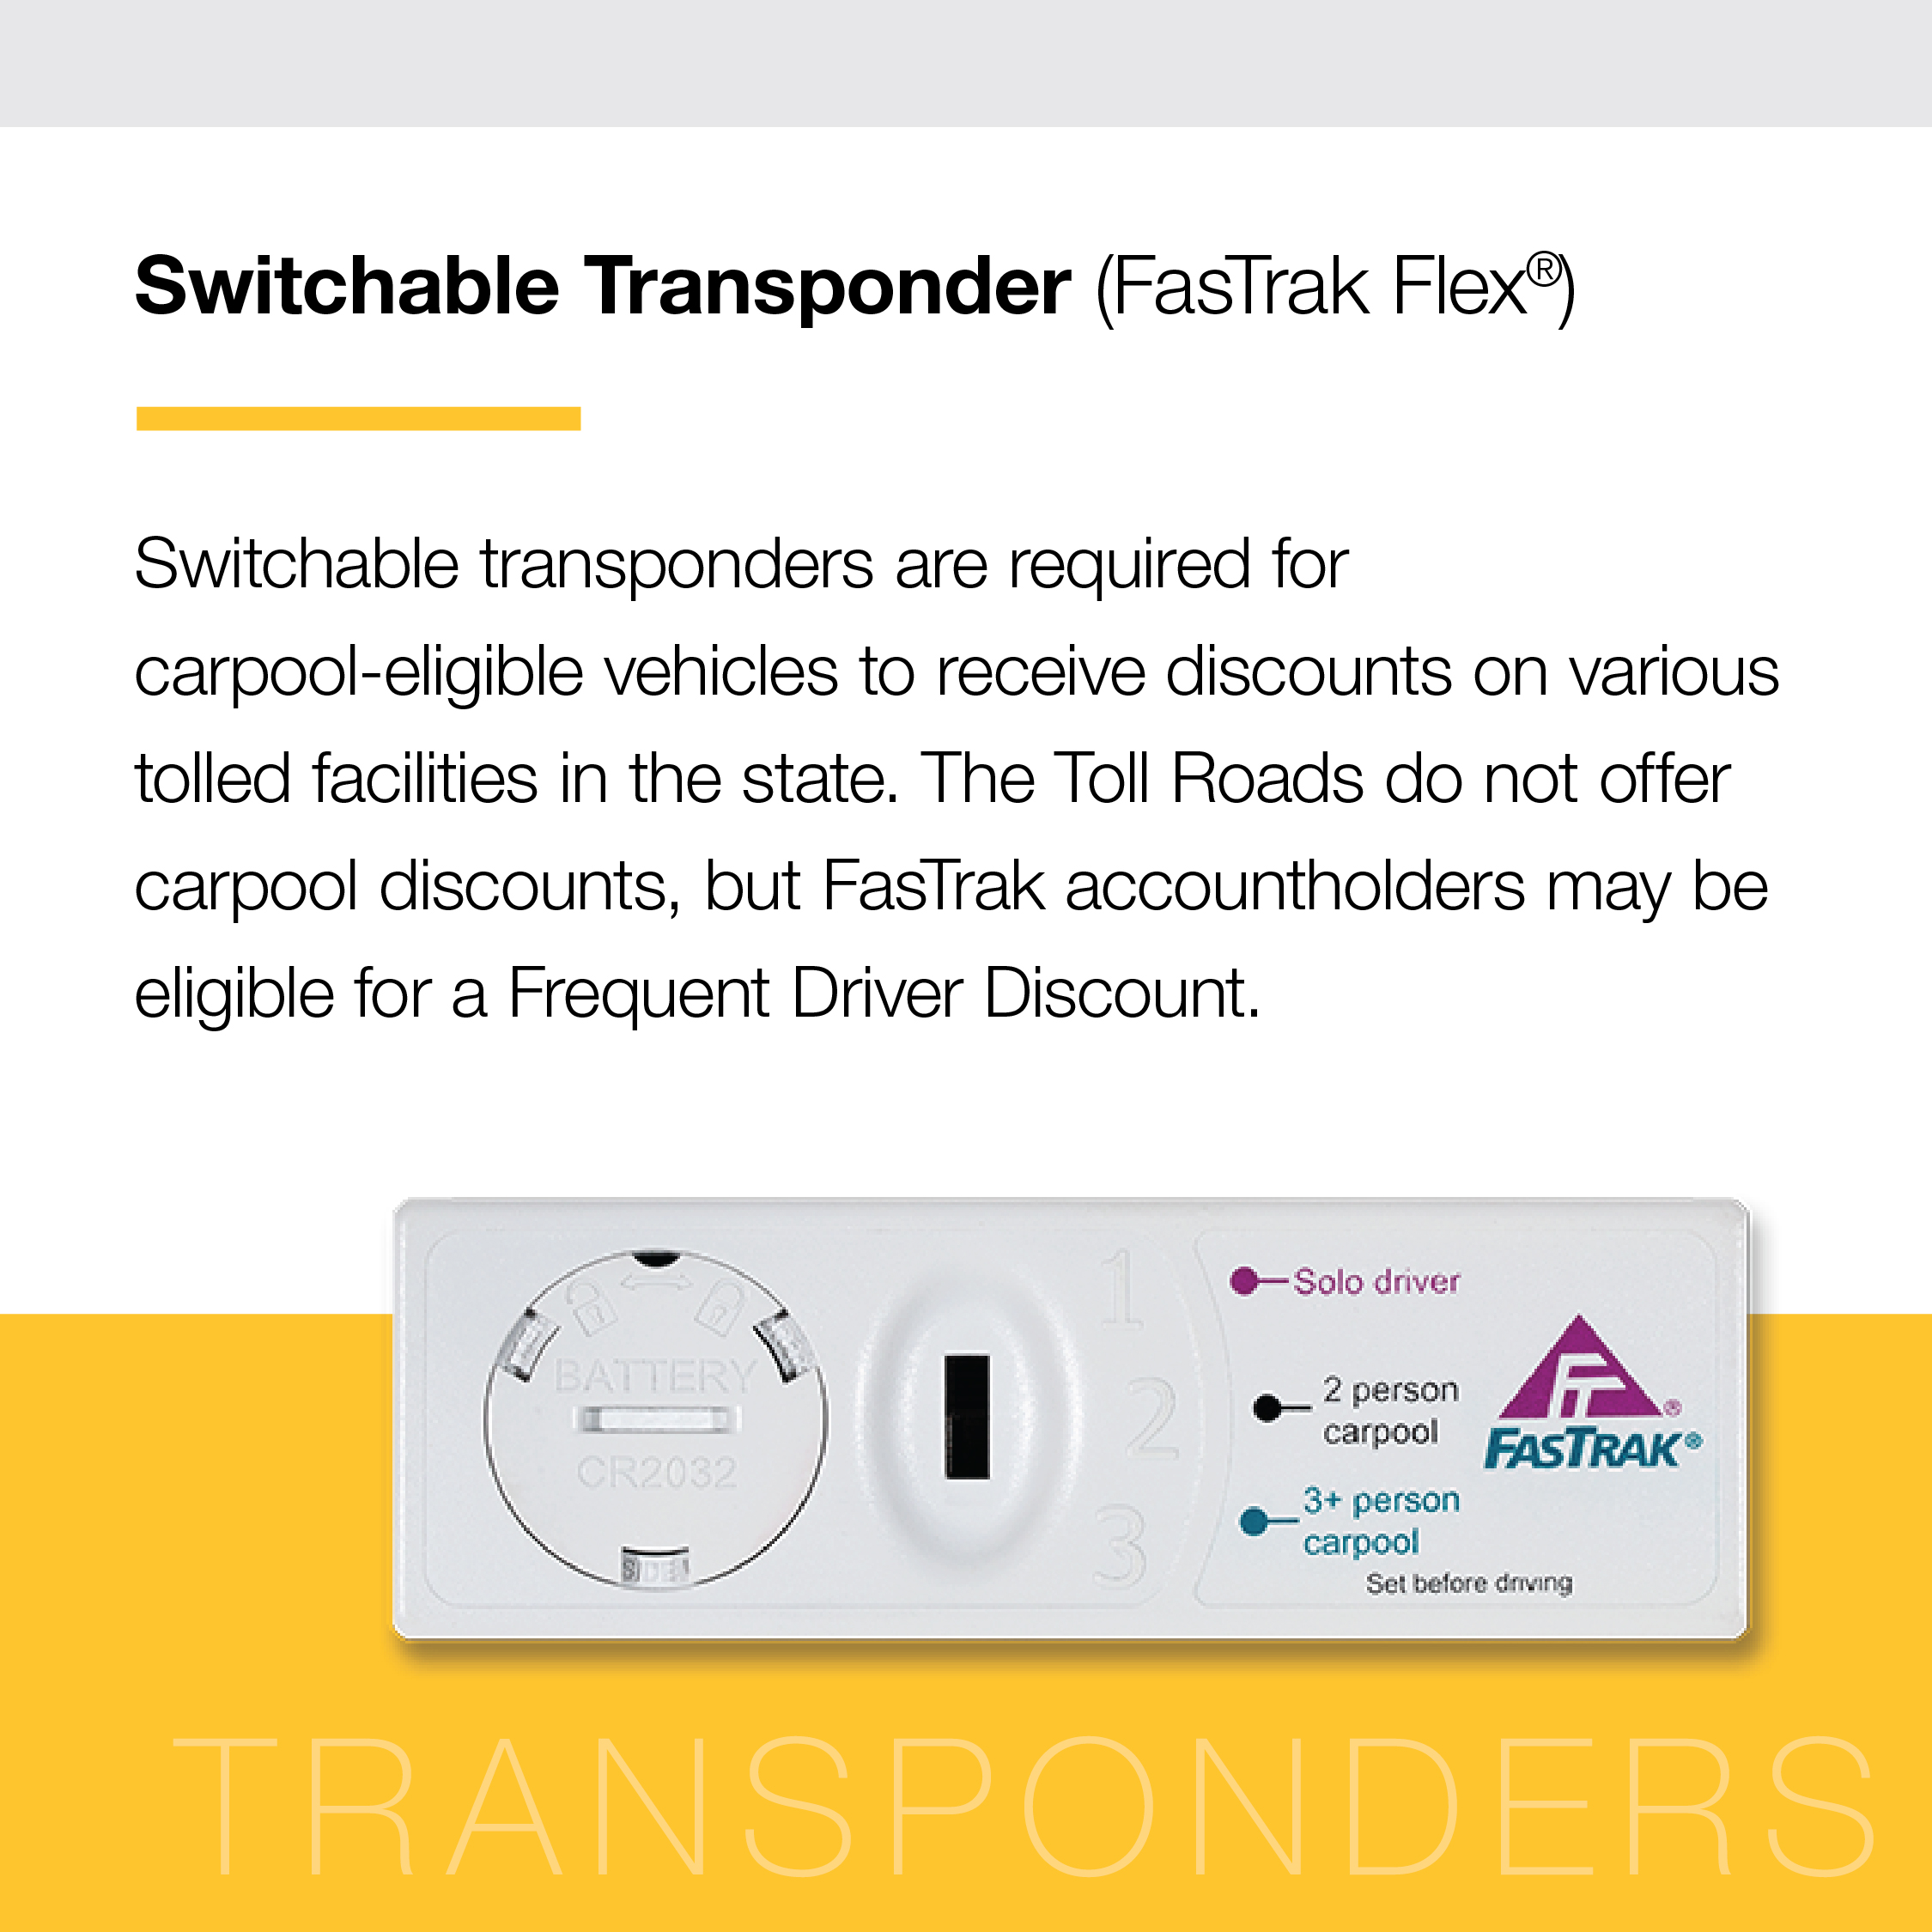 Graphic with text. Text reads "Switchable Transponder (FasTrak Flex) Switchable transponders are required for carpool-eligible vehicles to receive discounts on various tolled facilities in the state. The Toll Roads do not offer carpool discounts, but FasTrak accountholders may be eligible for a Frequent Driver Discount." Image of a switchable Transponder.